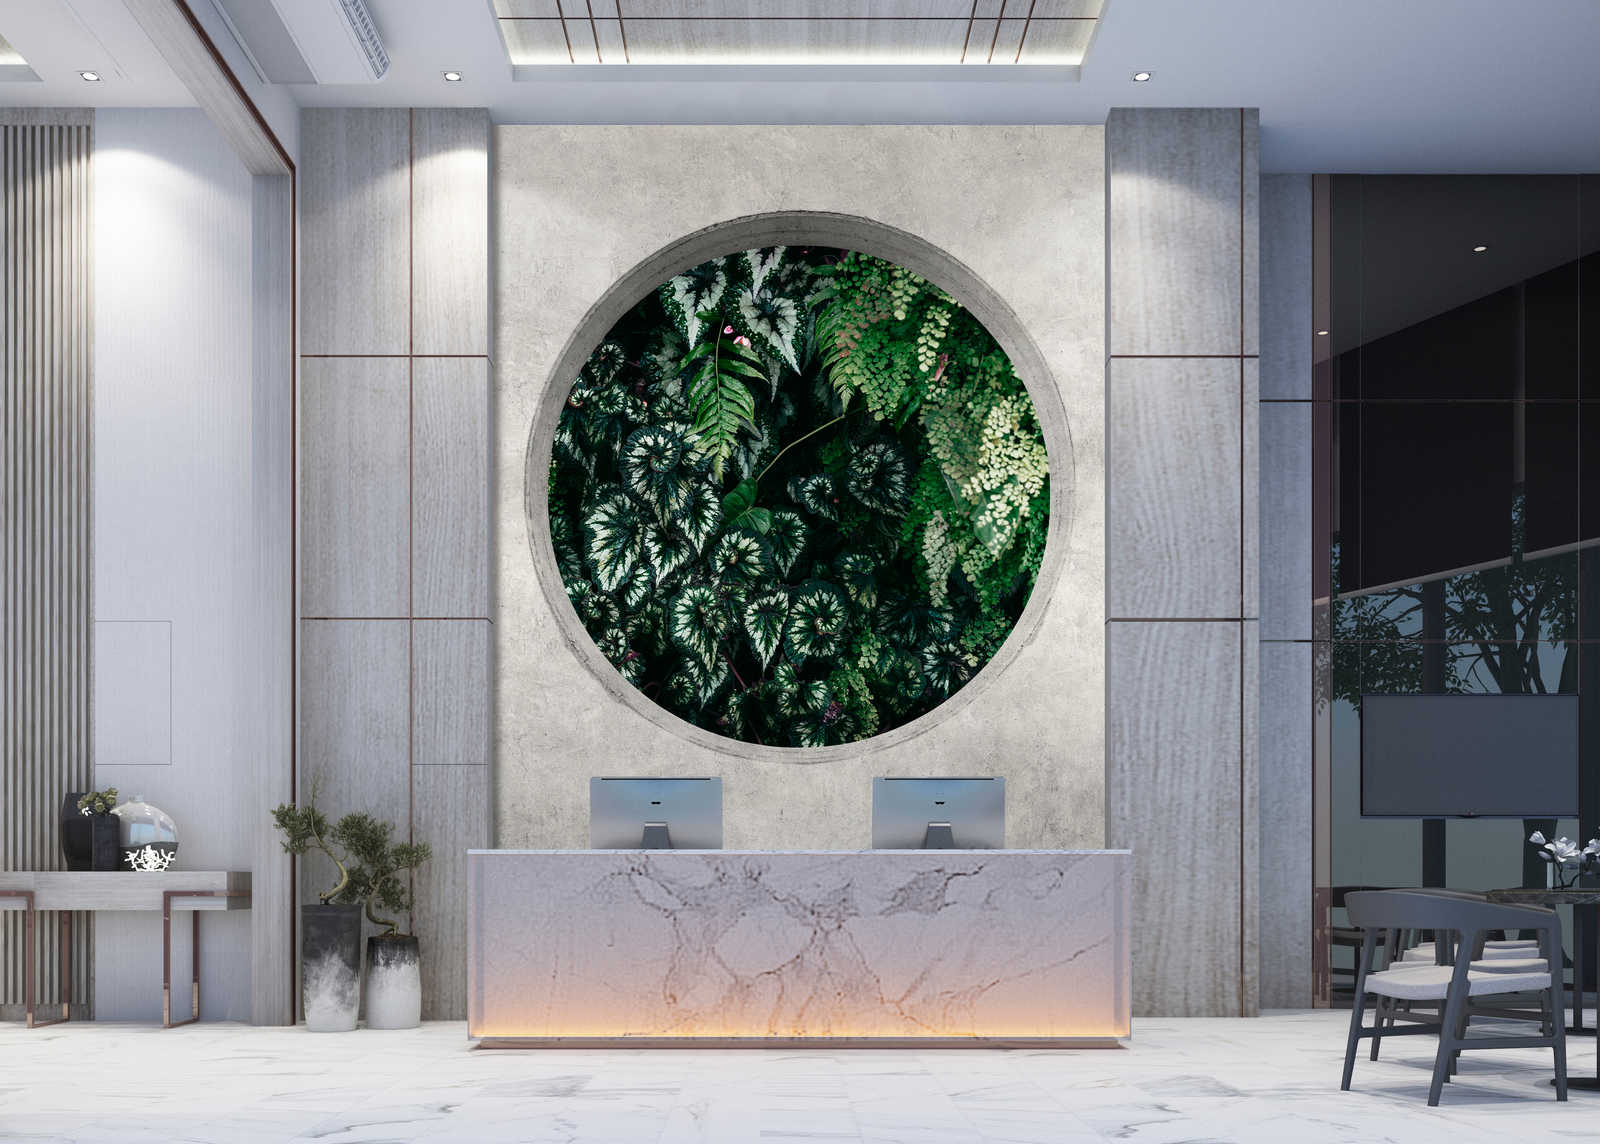             Deep Green 1 - wall mural window round with jungle plants
        